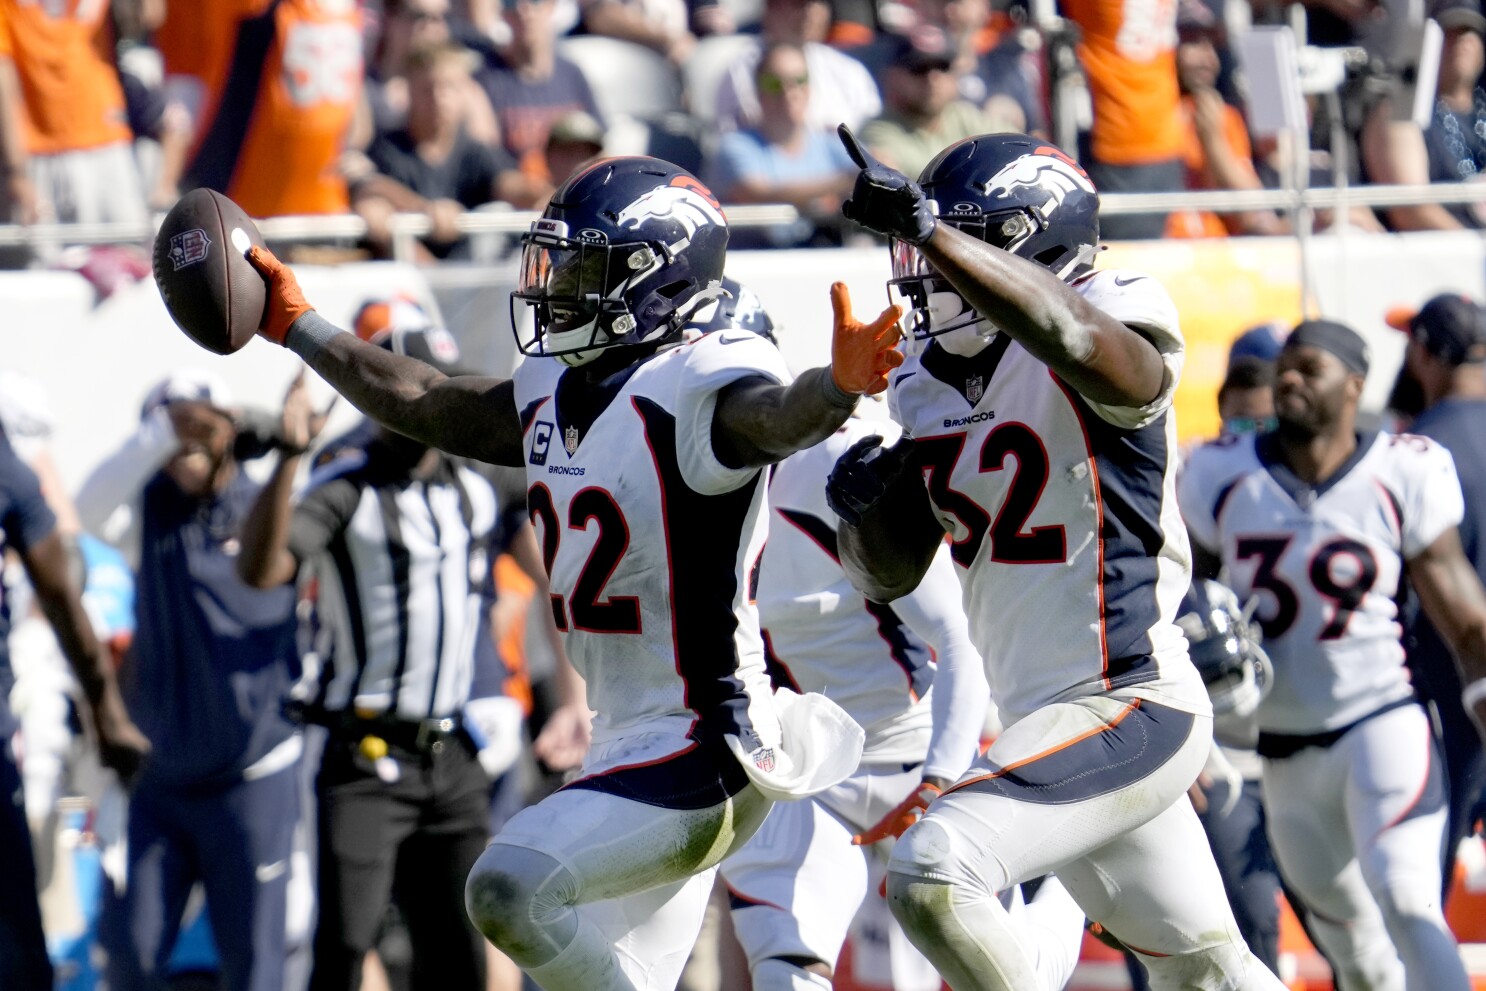 Broncos aren't basking in victory and know they can't stay sloppy